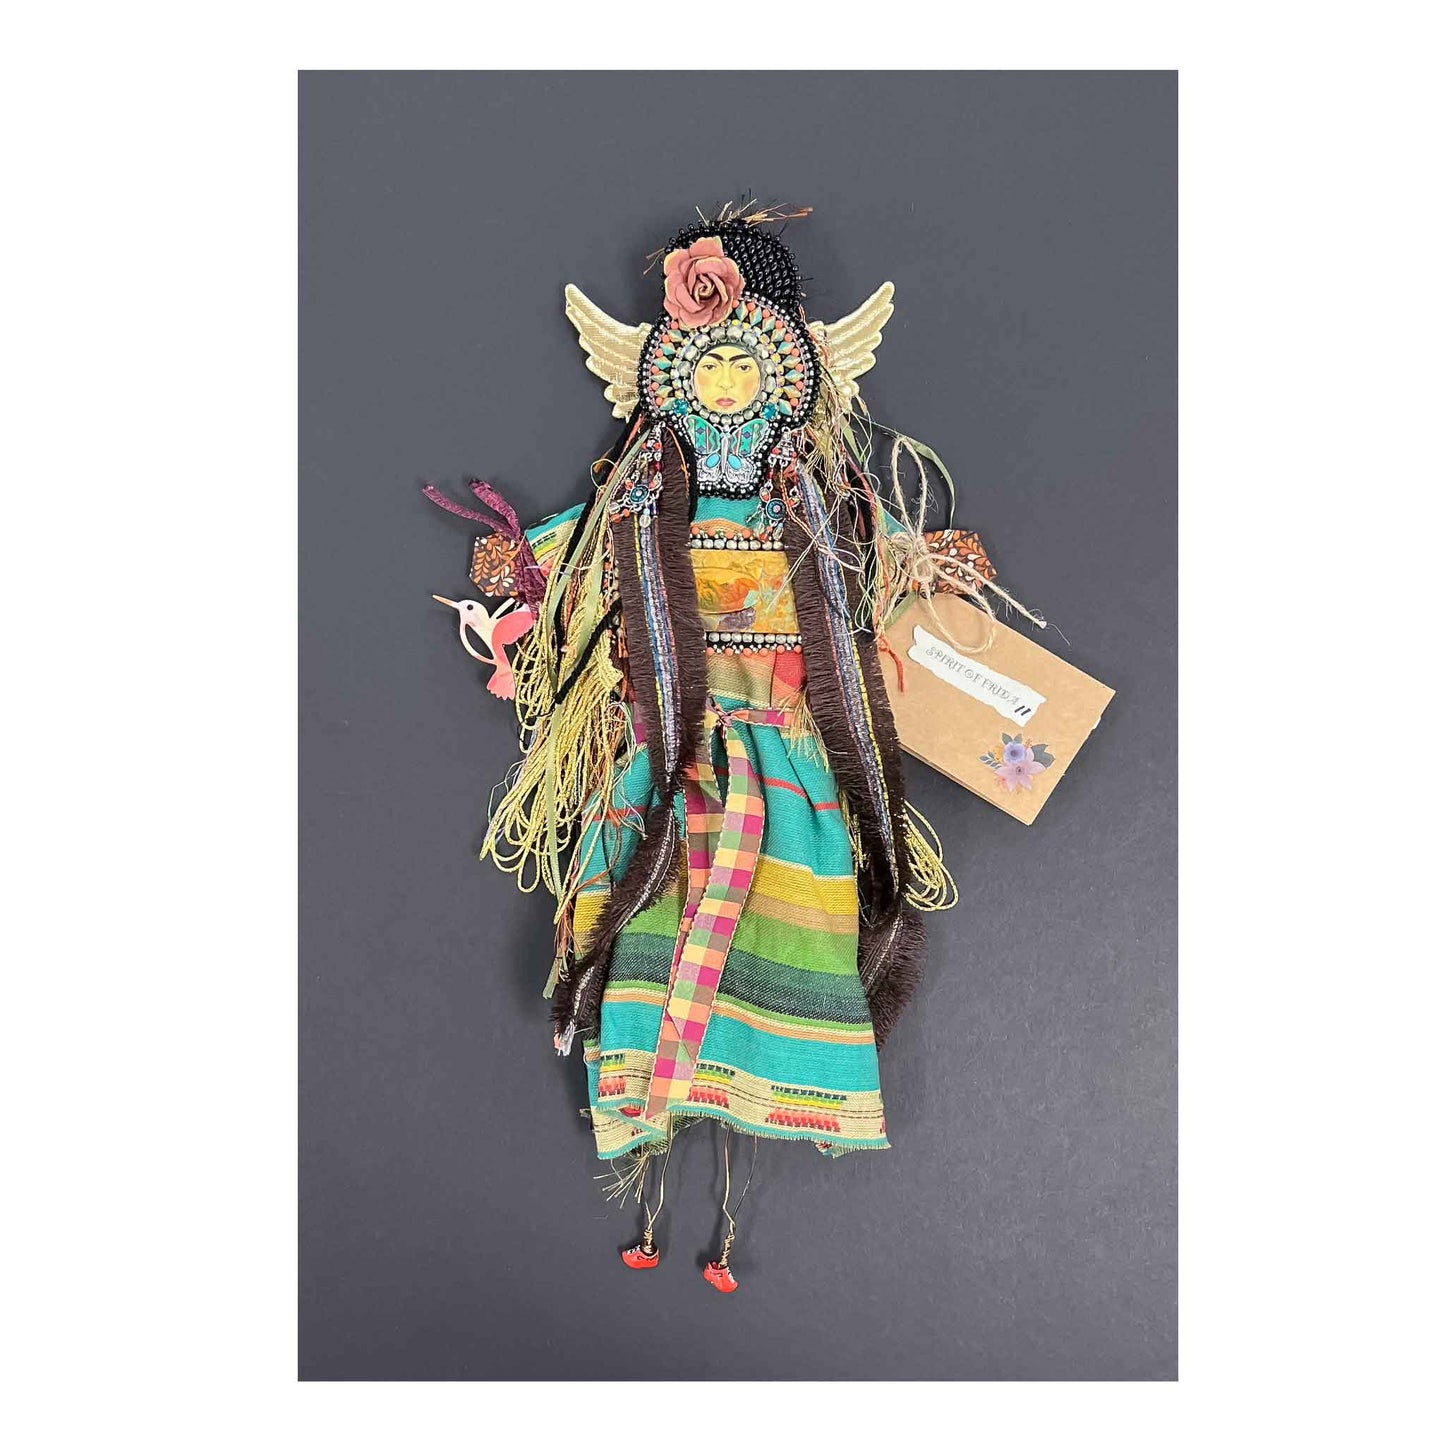 Mixed Media Spirit Doll, wall hanging, fabric, wood, wire, yarn, ribbon, bead embroidery, Doll, positive energy, Frida Kahlo Face, Dimensions  20"x11"